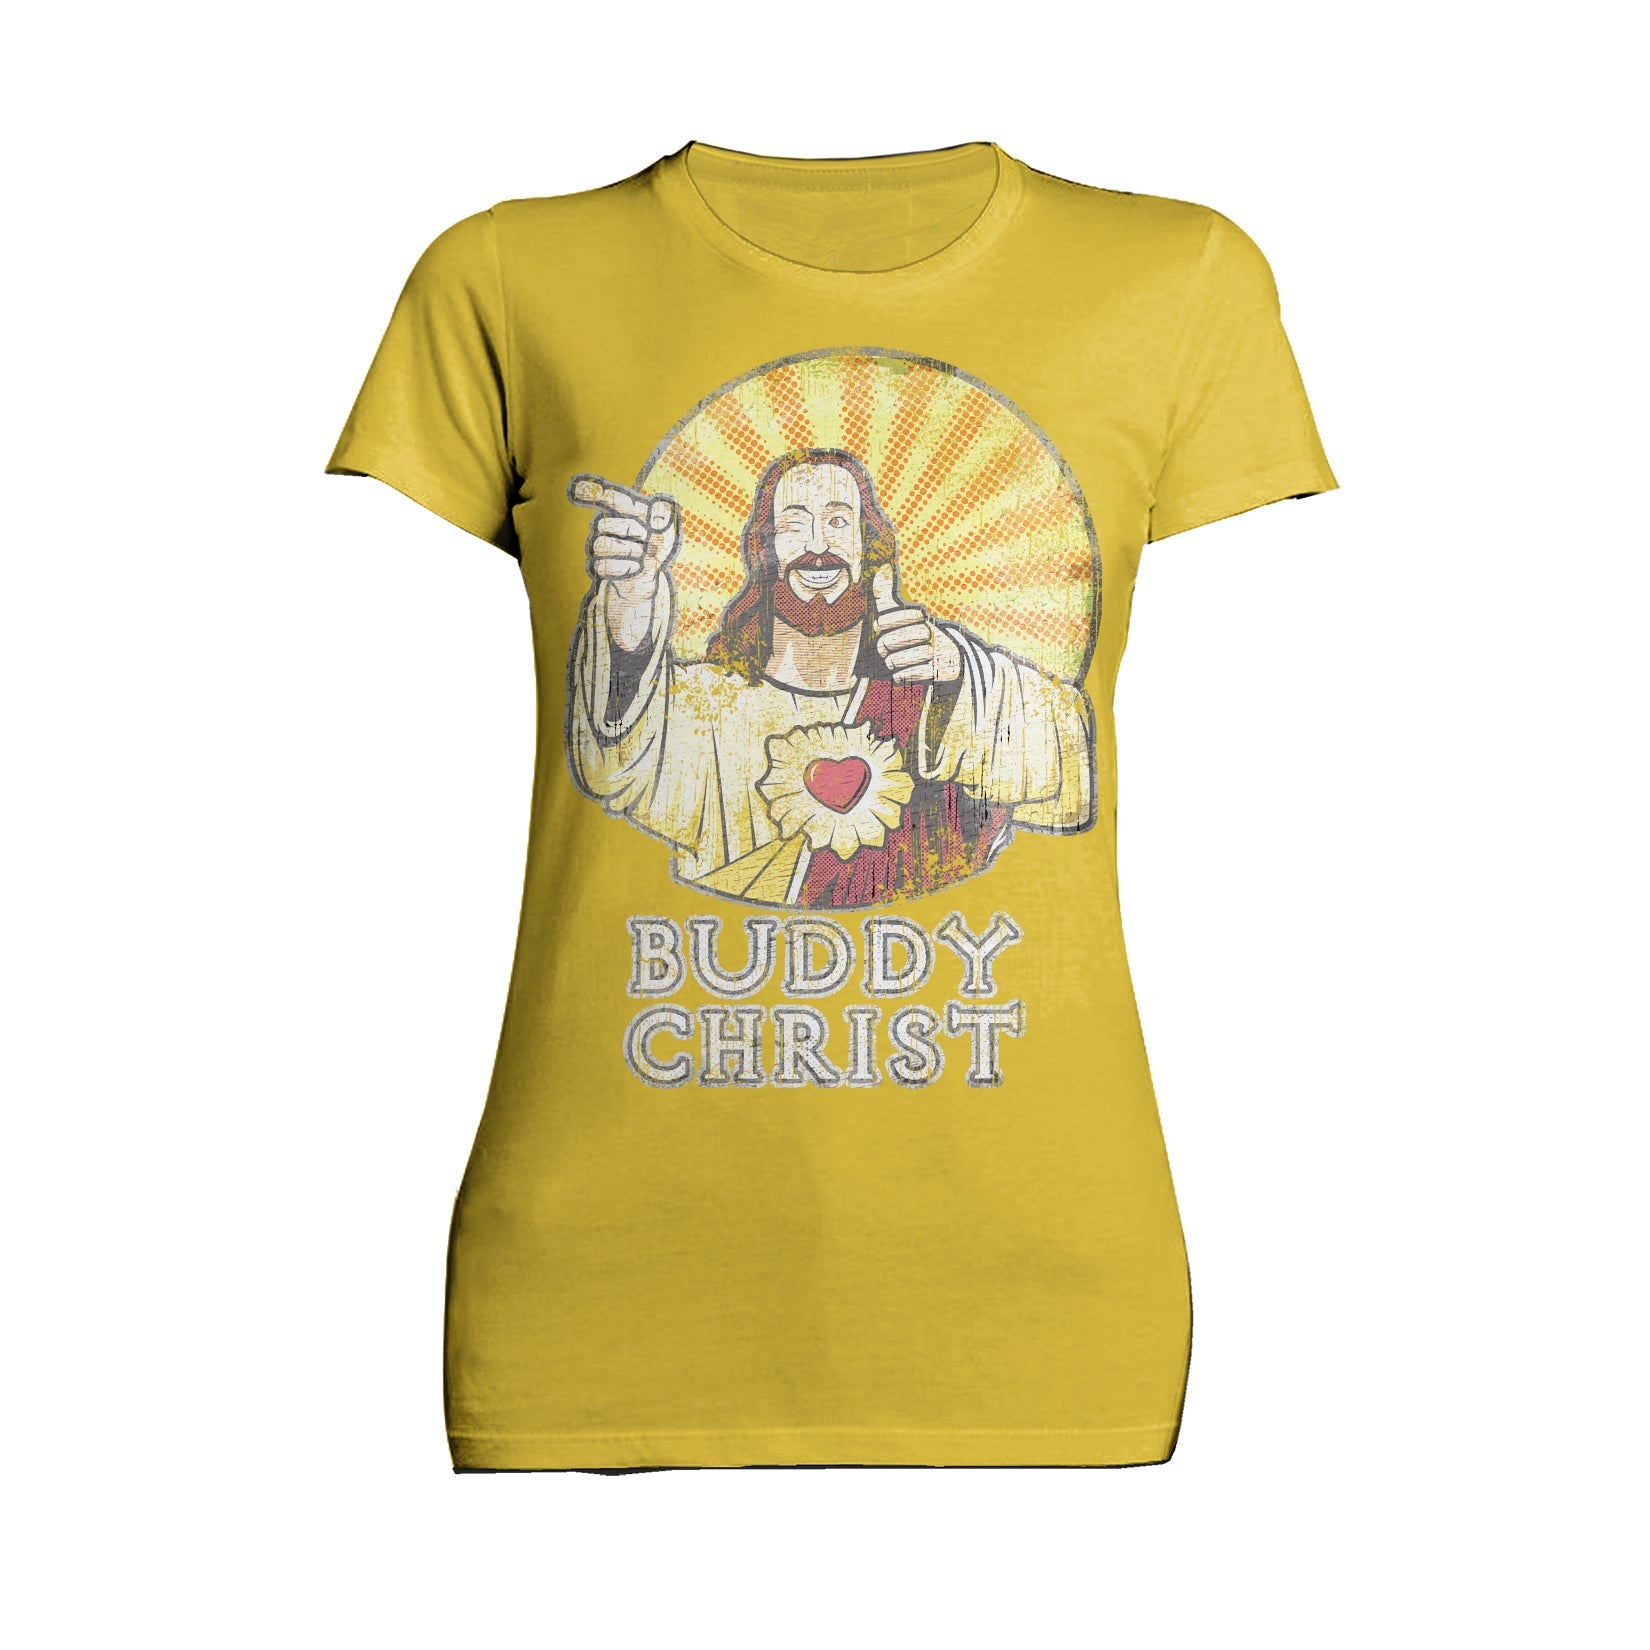 Kevin Smith View Askewniverse Buddy Christ Got Summer Vintage Variant Official Women's T-Shirt